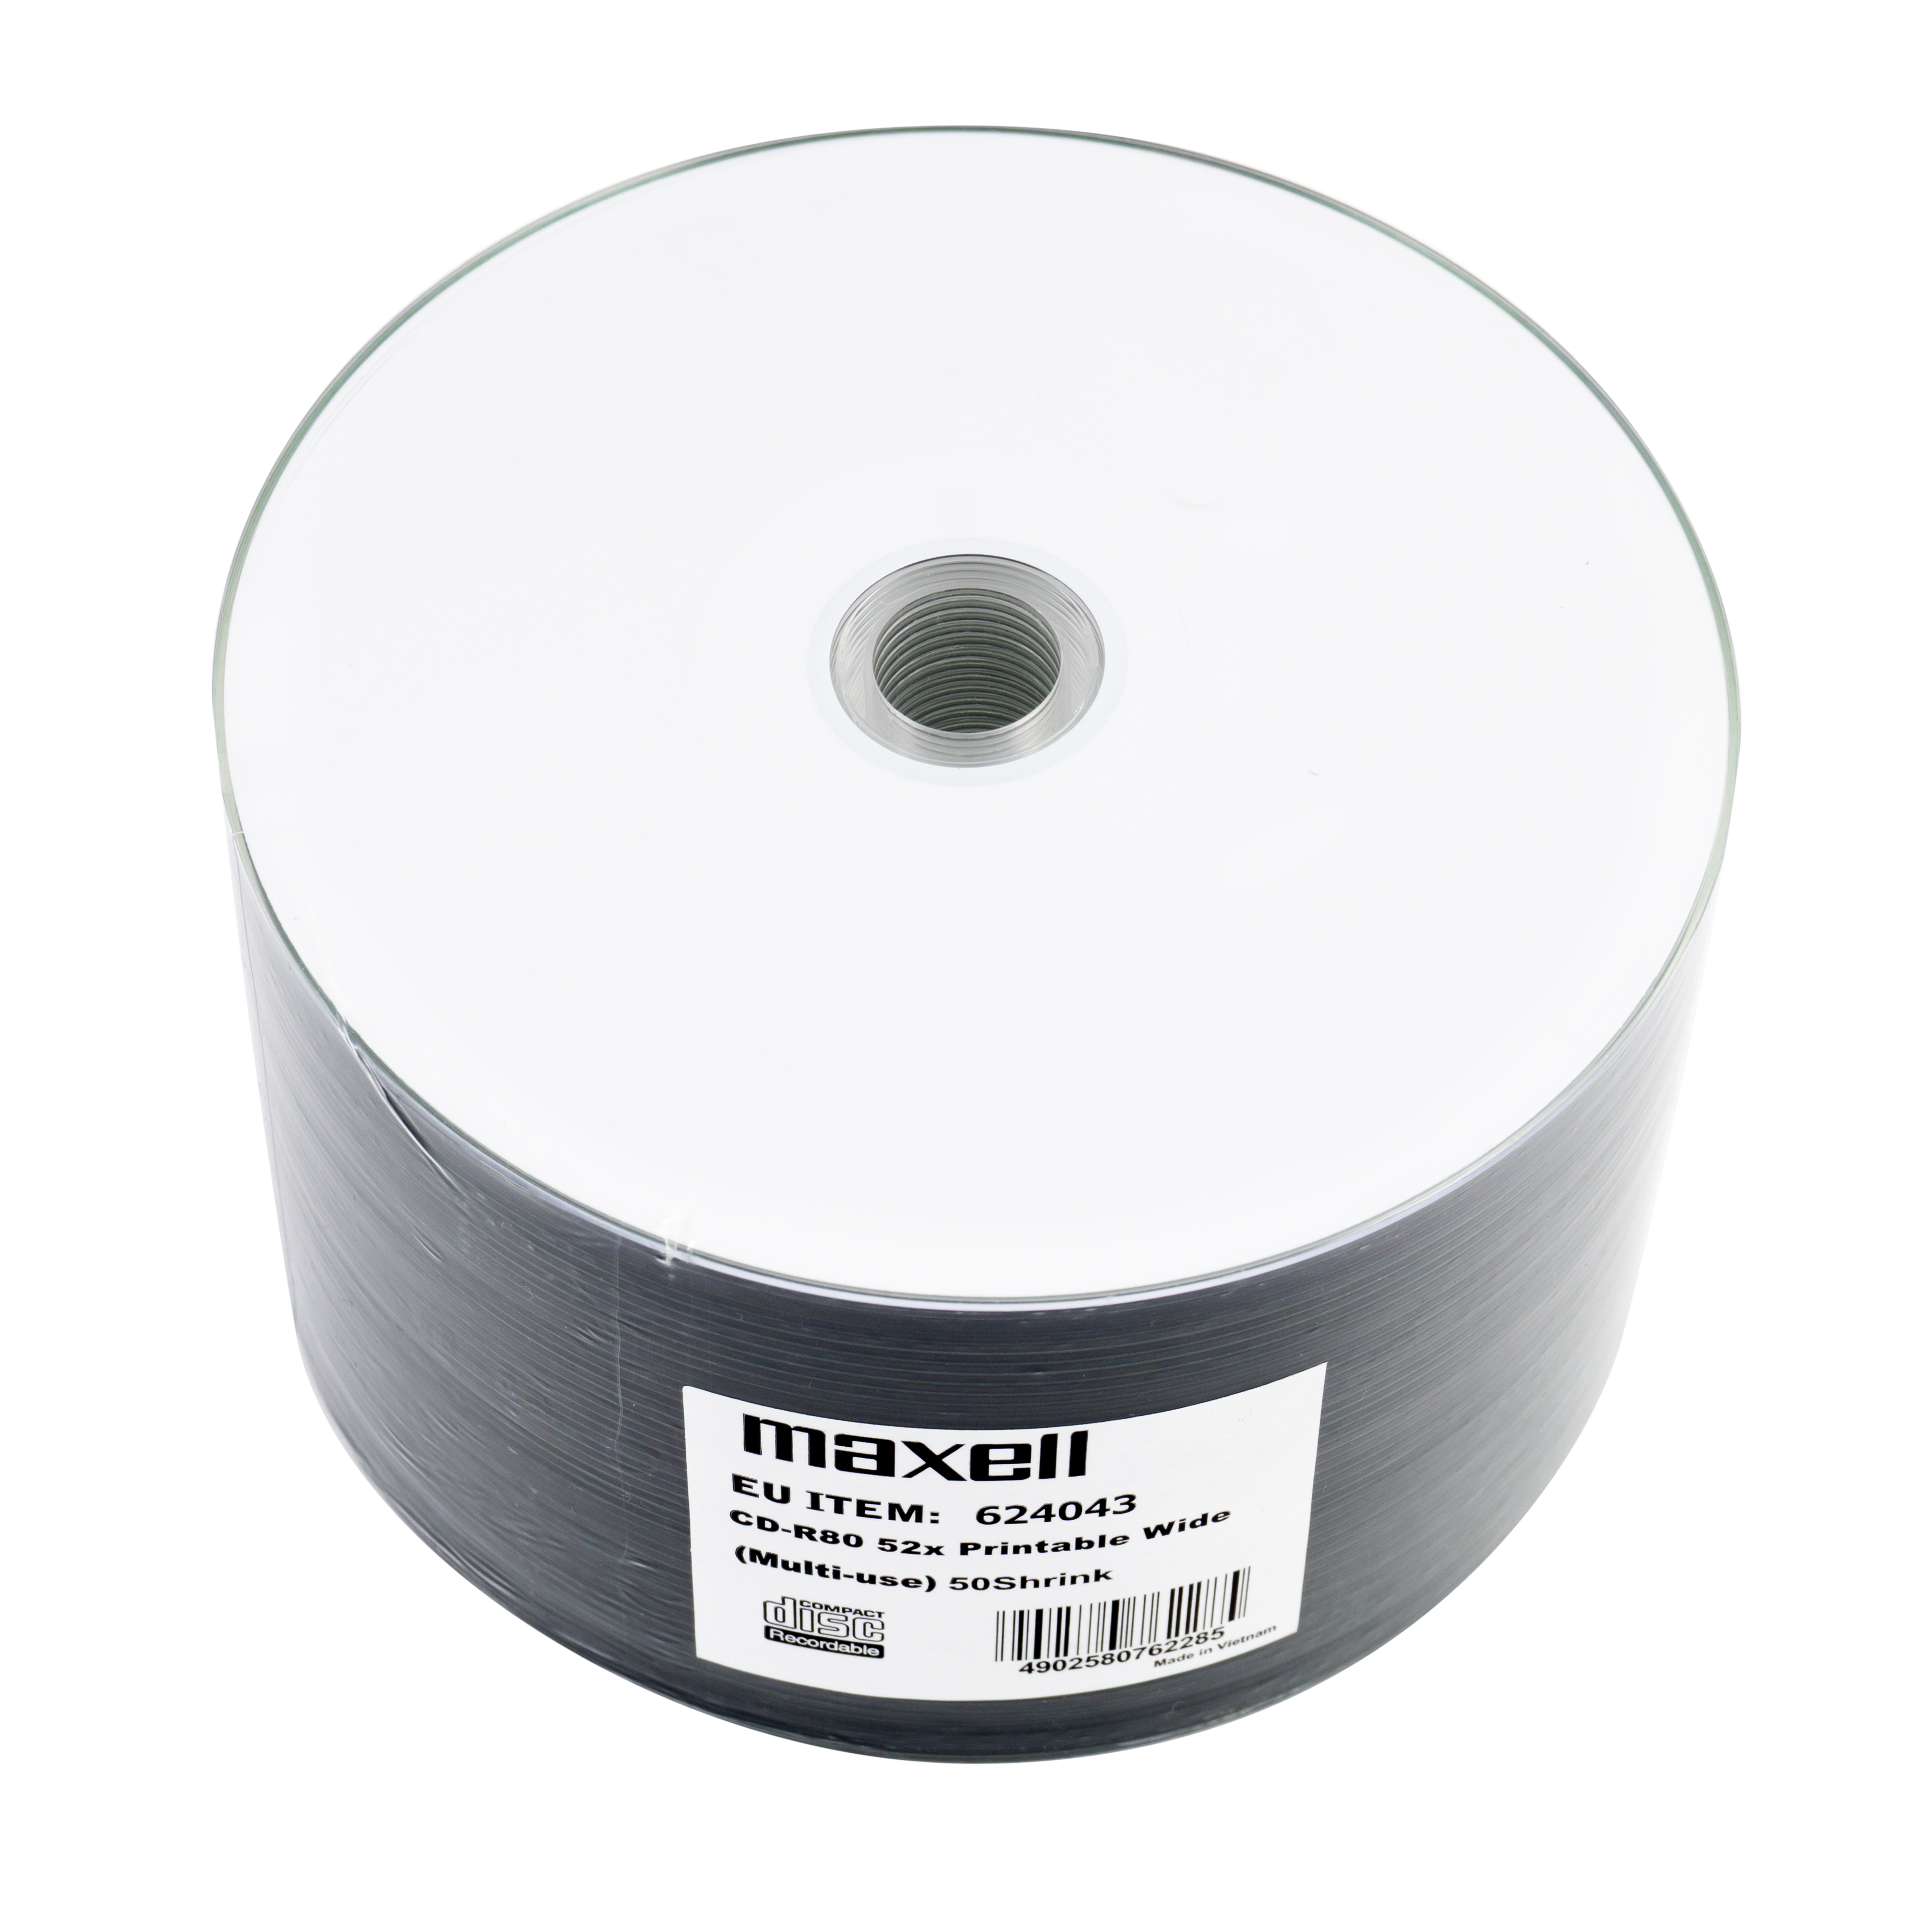 MAXELL 624006 by MAXELL Best Price Square CDR 80 White Print Spindle 50PK 